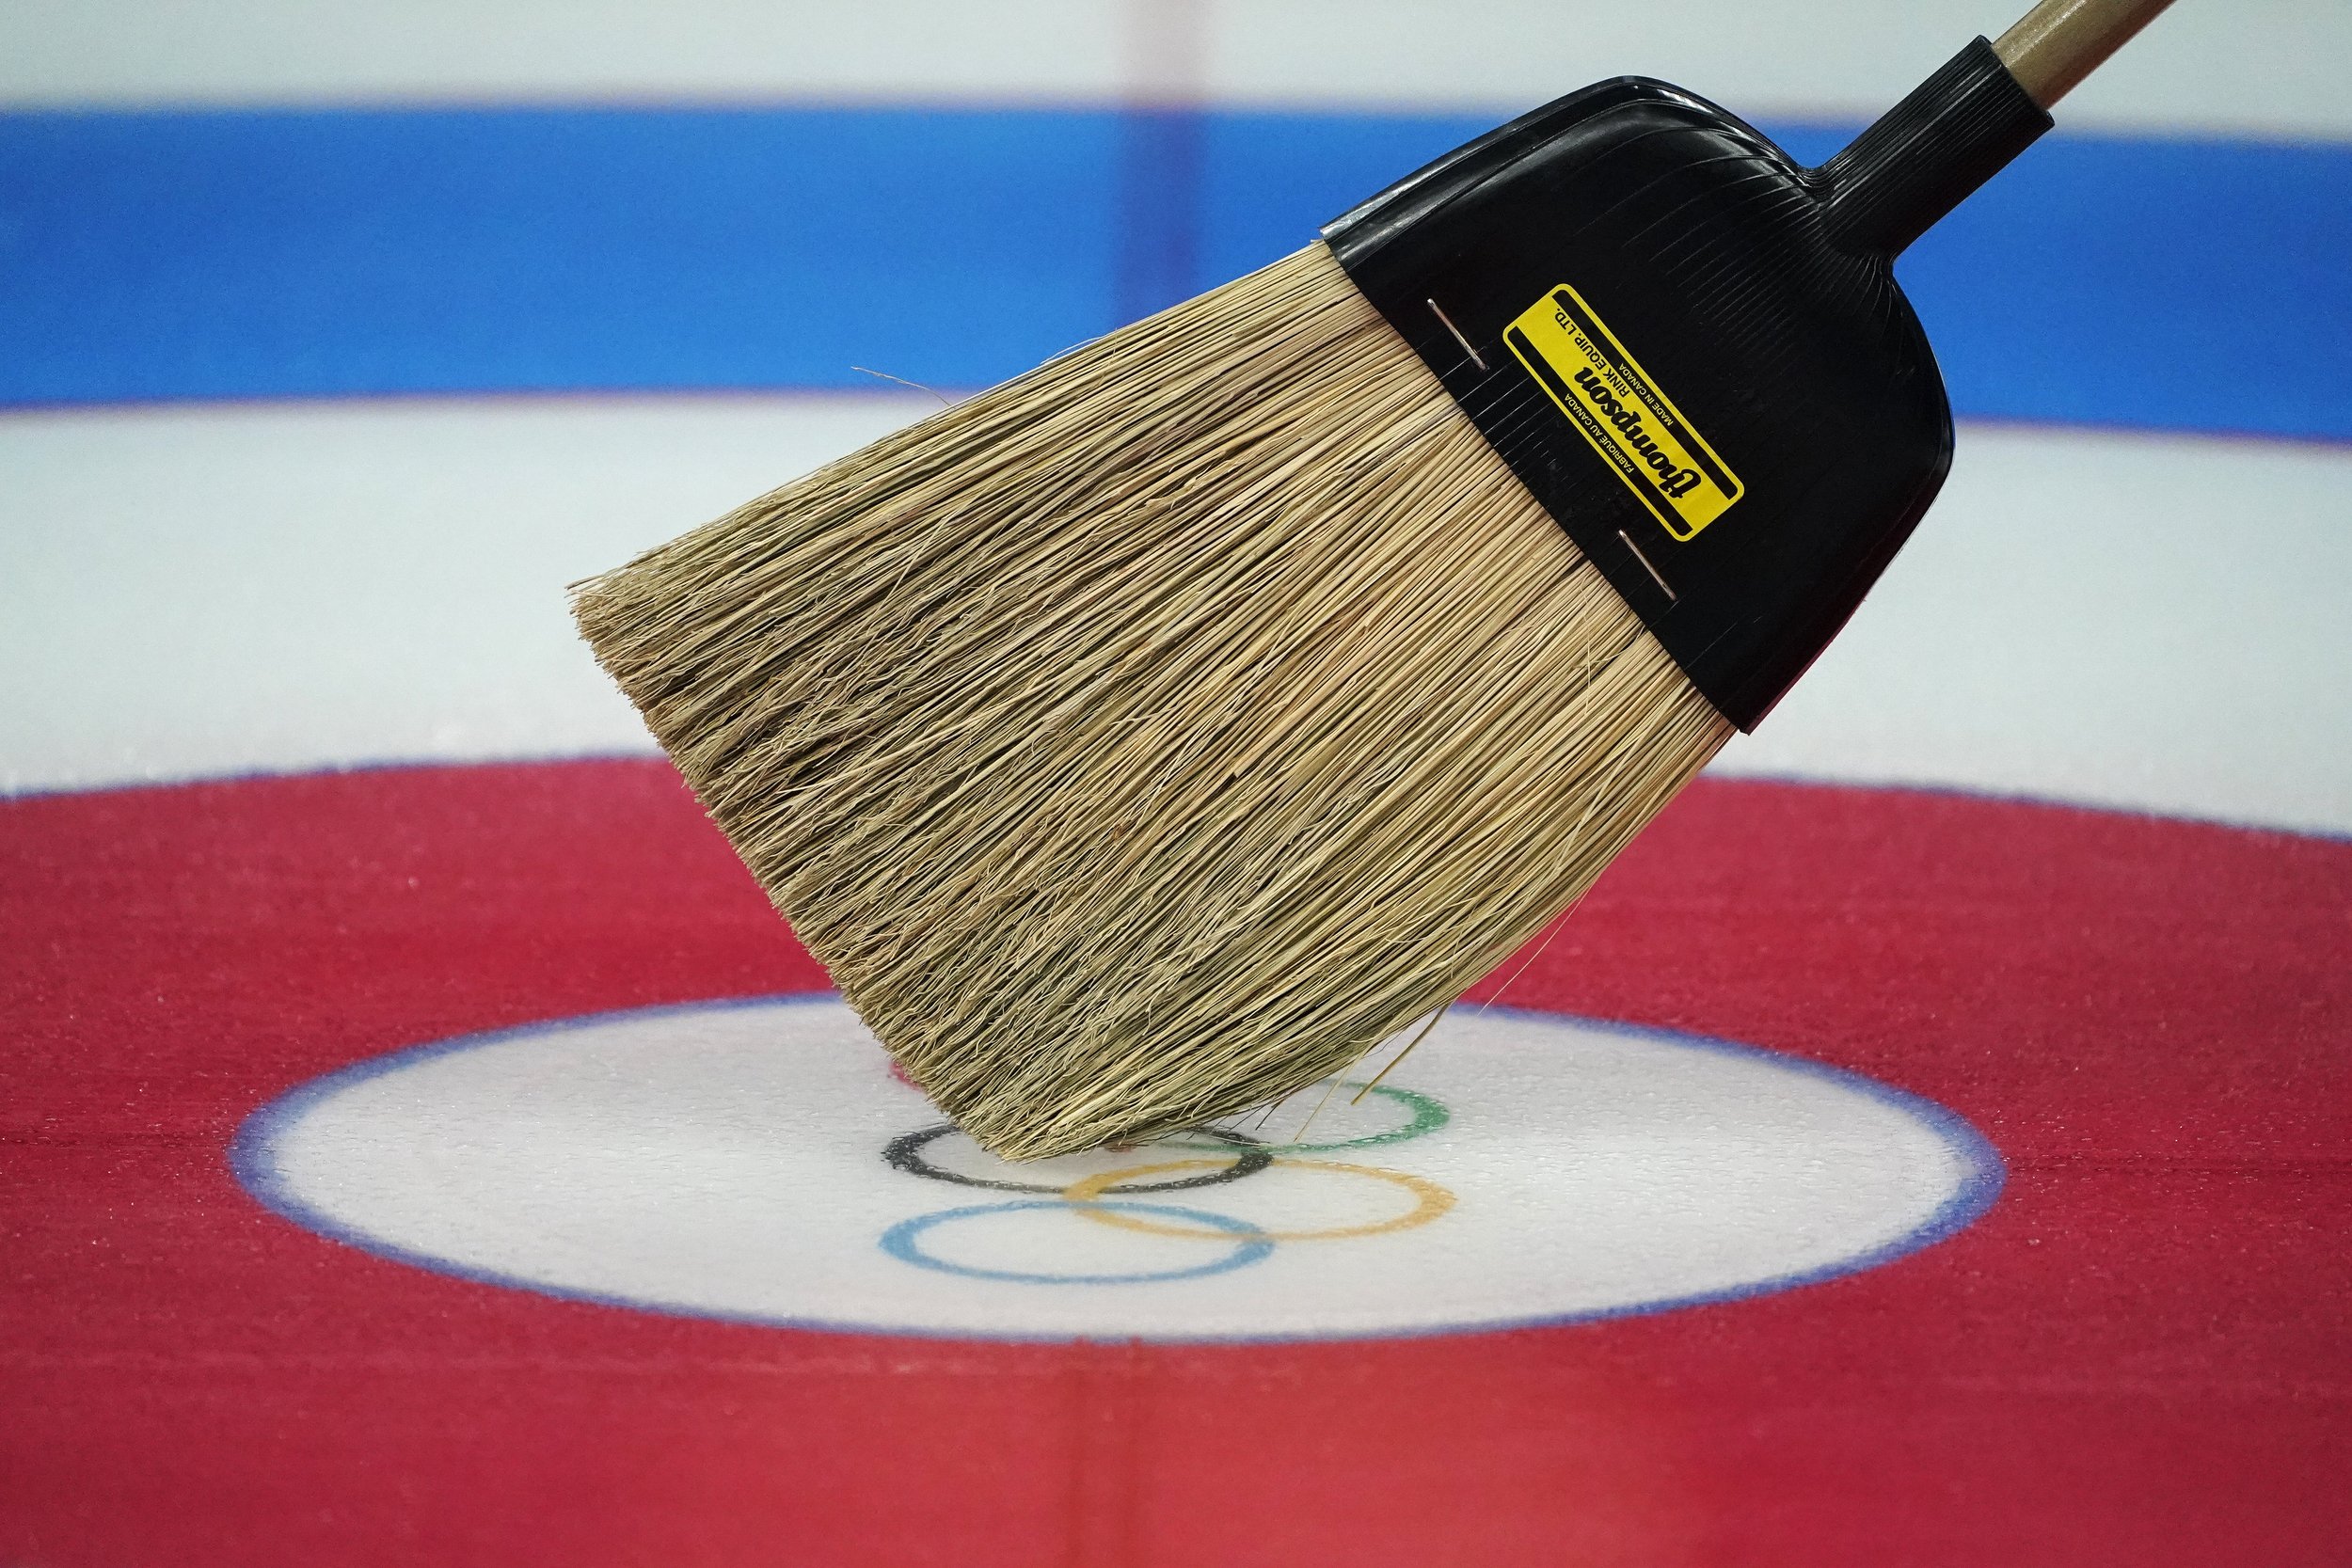  A broom is used for target guidance at the curling venue ahead of the Beijing Winter Olympics Tuesday, Feb. 1, 2022, in Beijing. (AP Photo/Brynn Anderson) 